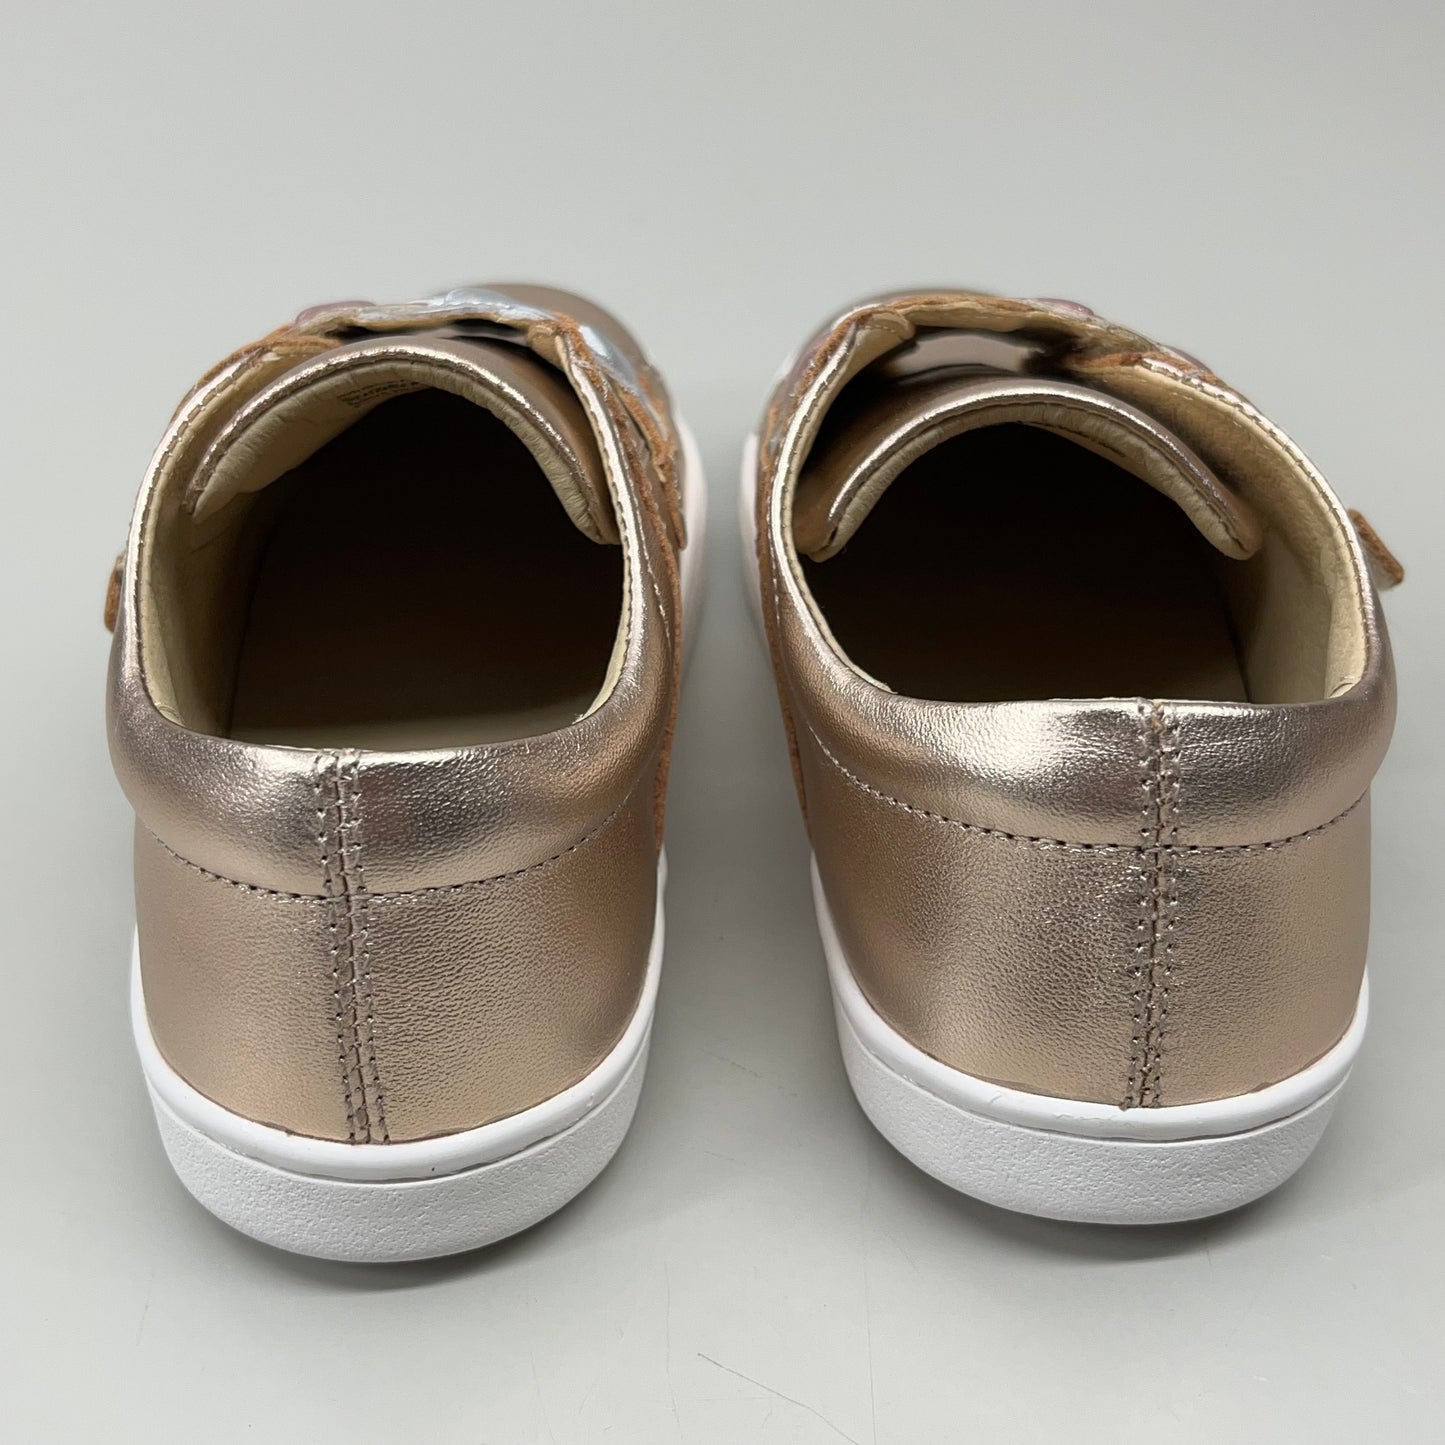 OLD SOLES Igster Sneakers Kid's Leather Shoe Sz 25 US 9 Copper/Silver/Pink Frost #6132